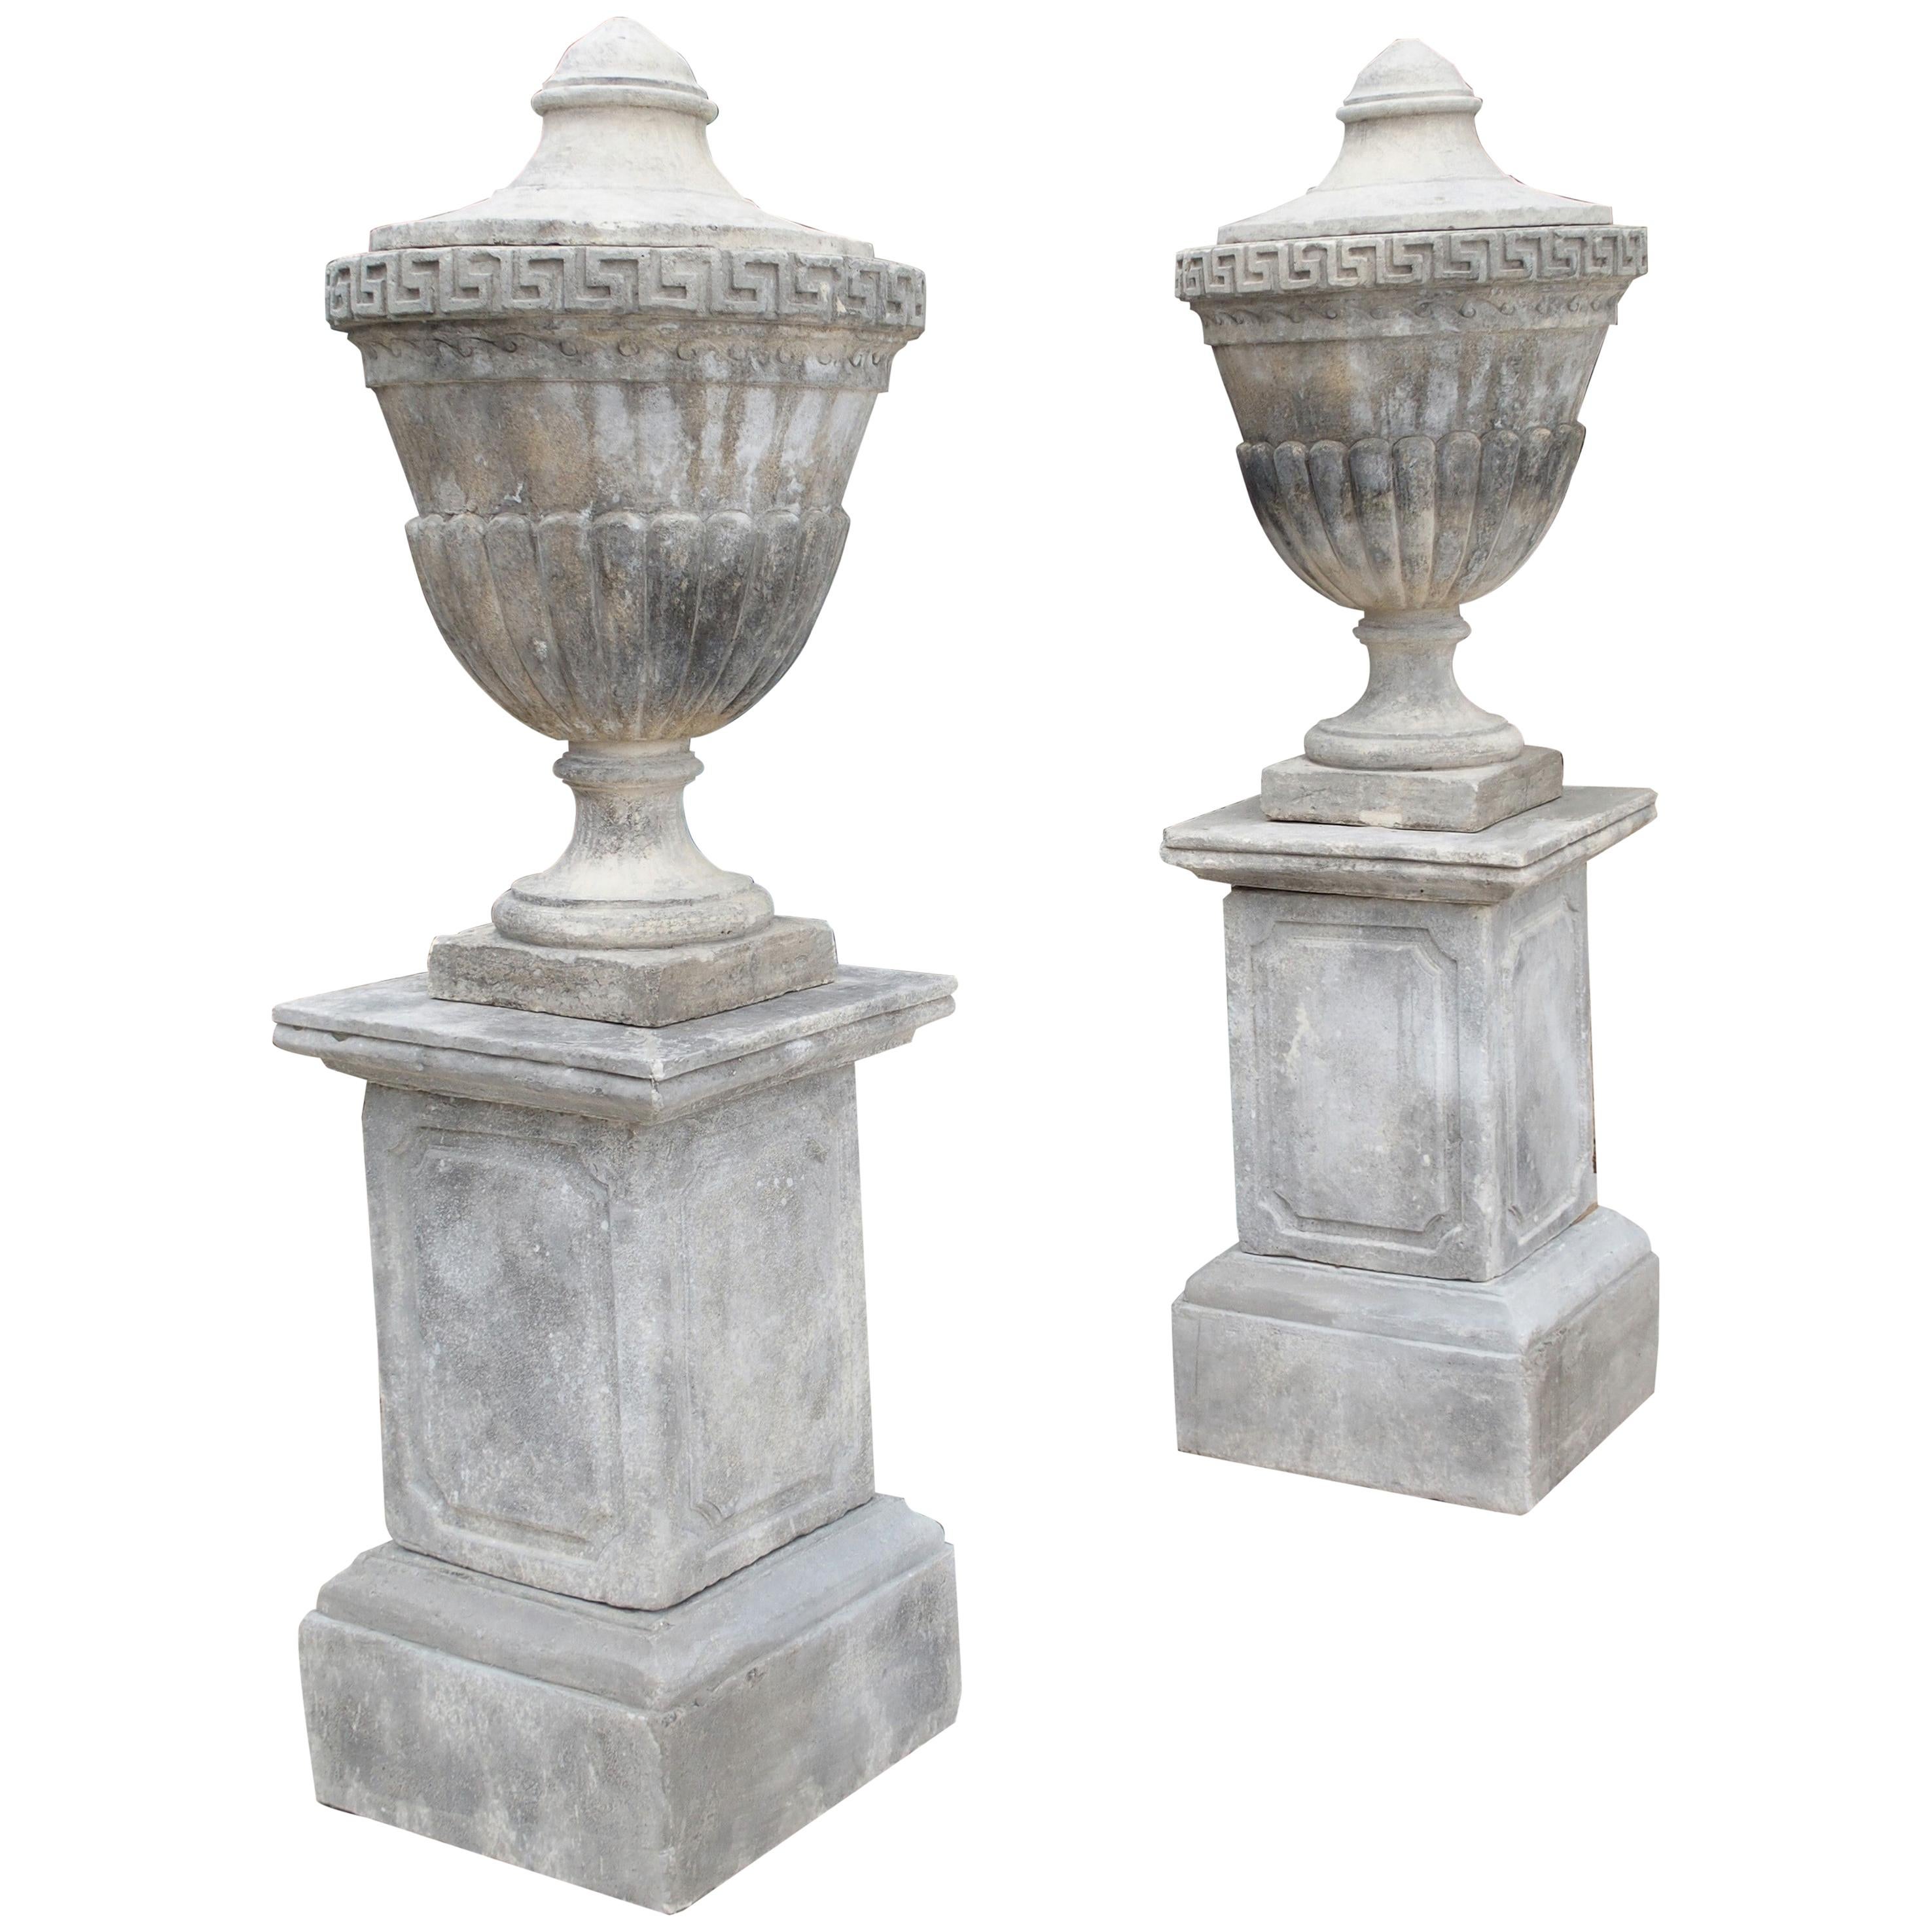 Pair of Neoclassical Composition Limestone Urns on Pedestals, Southern Italy